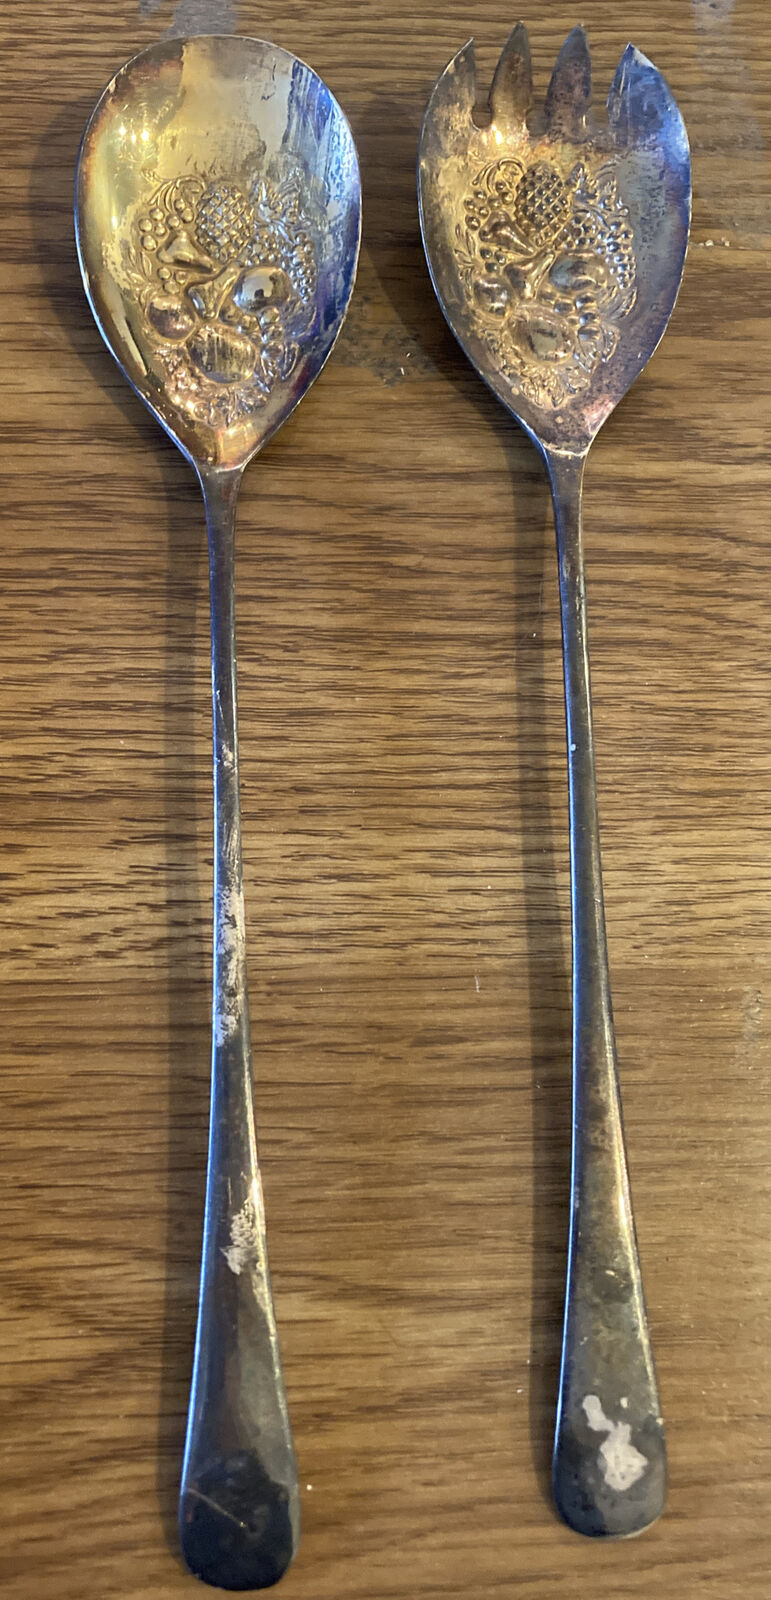 VINTAGE E.P.N.S. 9" Salad Set , Spoon and Fork Silverplate Made in  ENGLAND